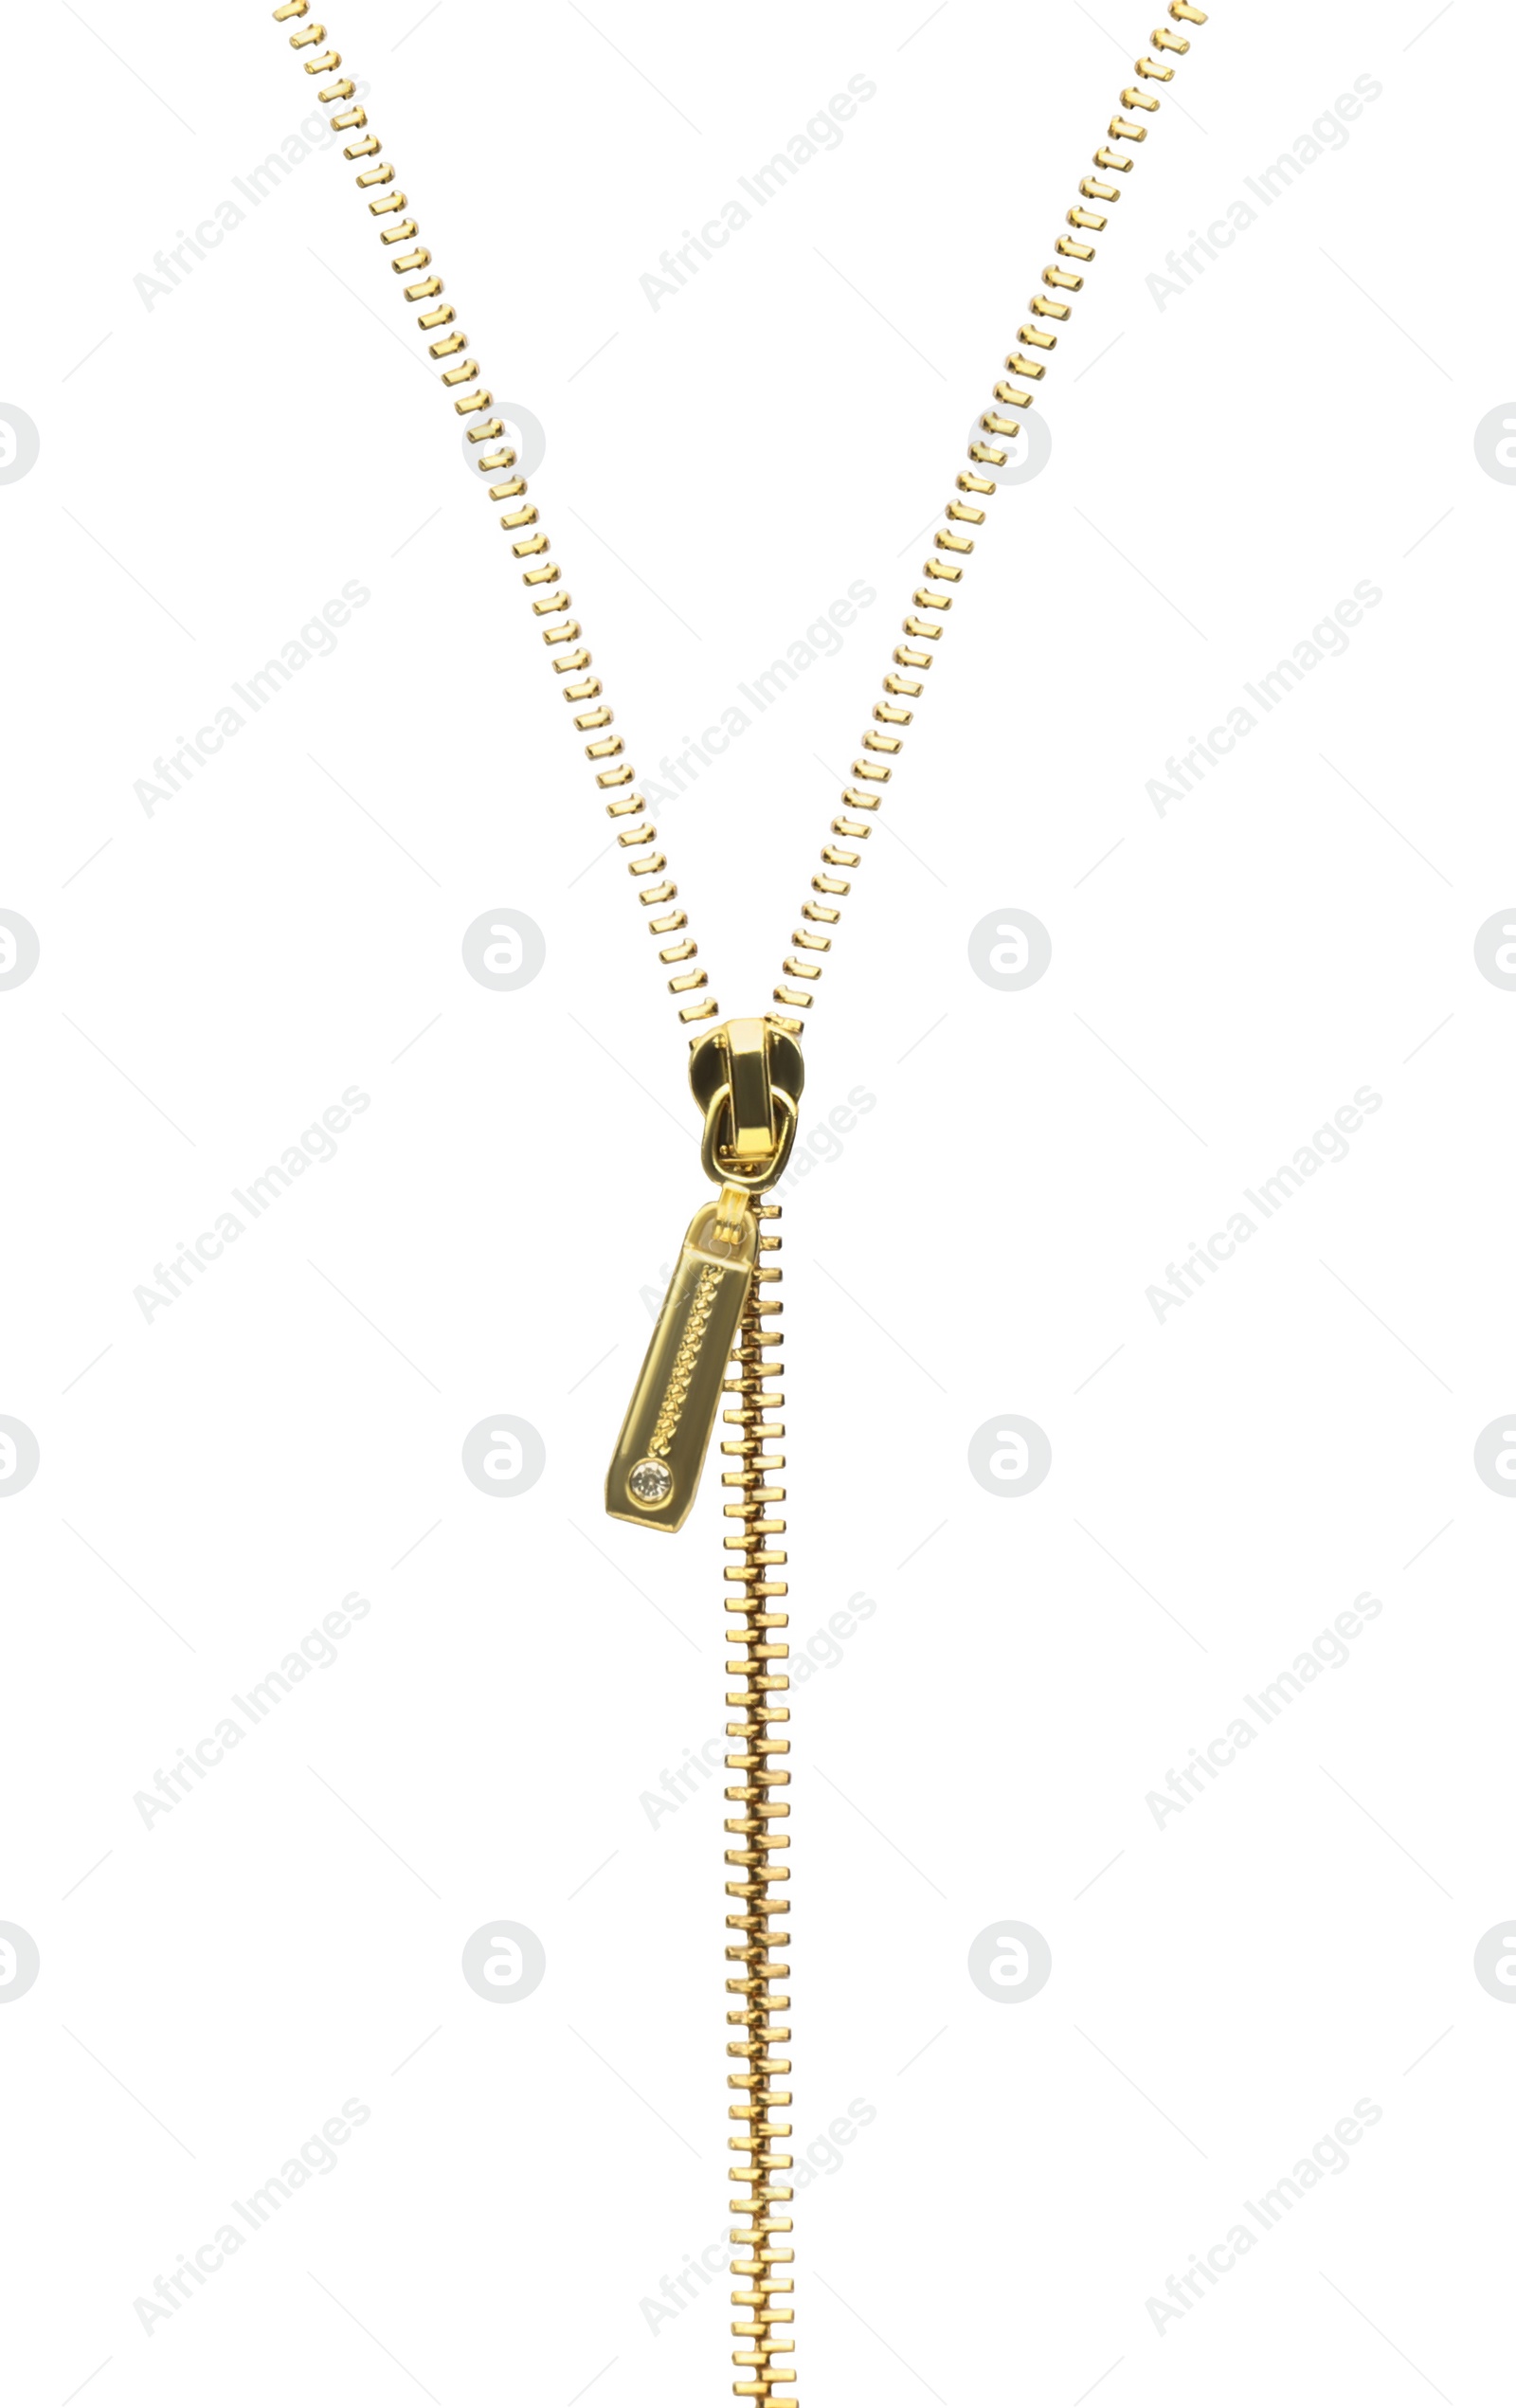 Image of Shiny golden metal zipper isolated on white 